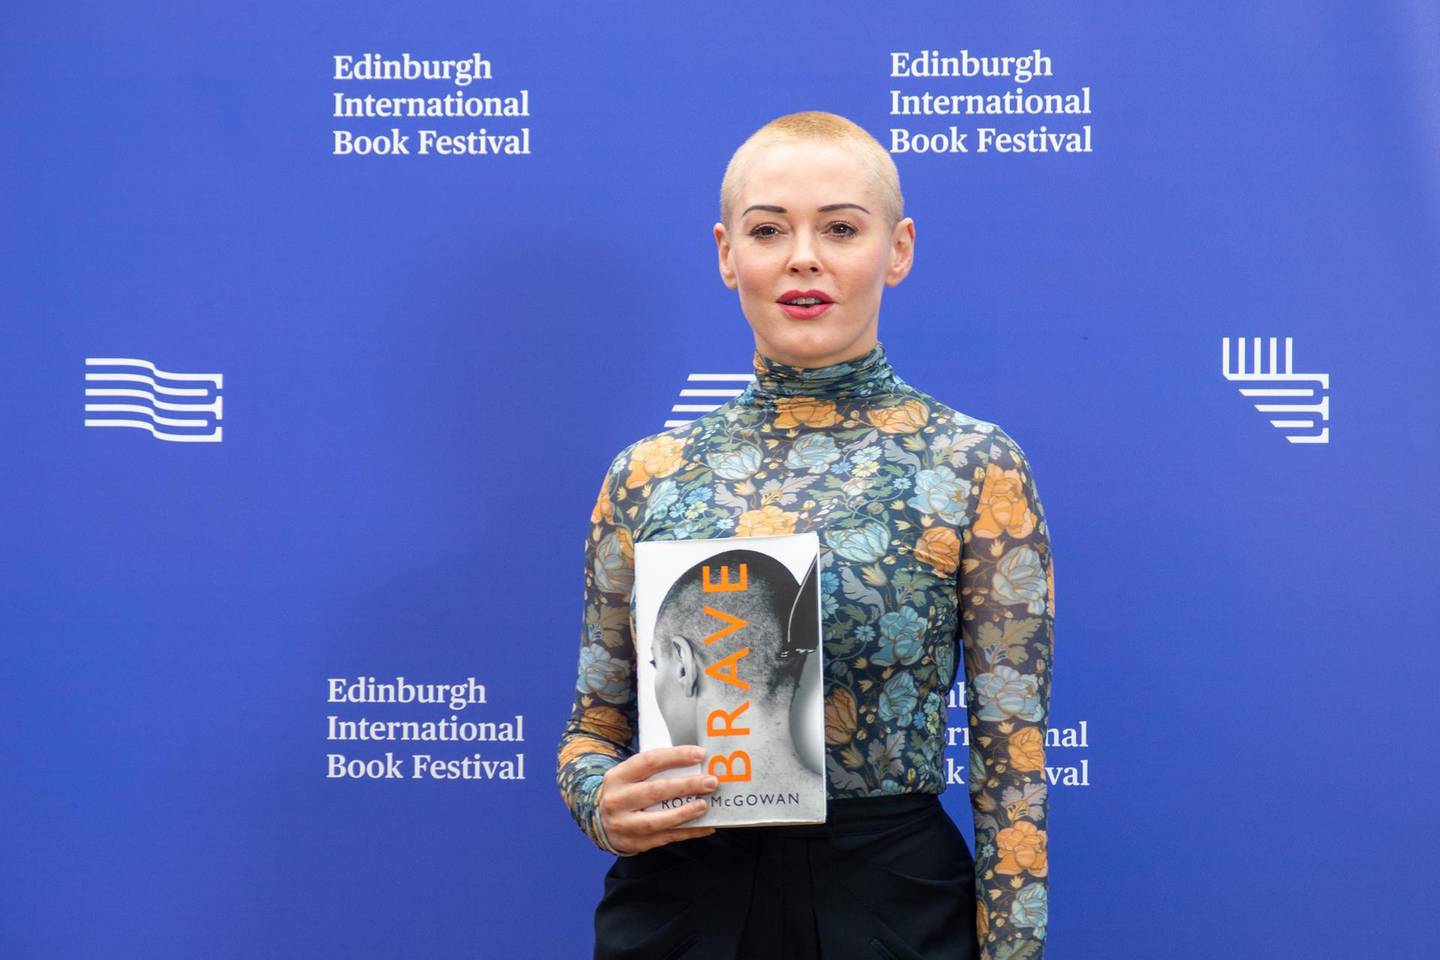 EDINBURGH, SCOTLAND - AUGUST 13:  American activist, former actress, author, model and singer Rose McGowan attends a photocall during the annual Edinburgh International Book Festival at Charlotte Square Gardens on August 13, 2018 in Edinburgh, Scotland.  (Photo by Roberto Ricciuti/Getty Images)